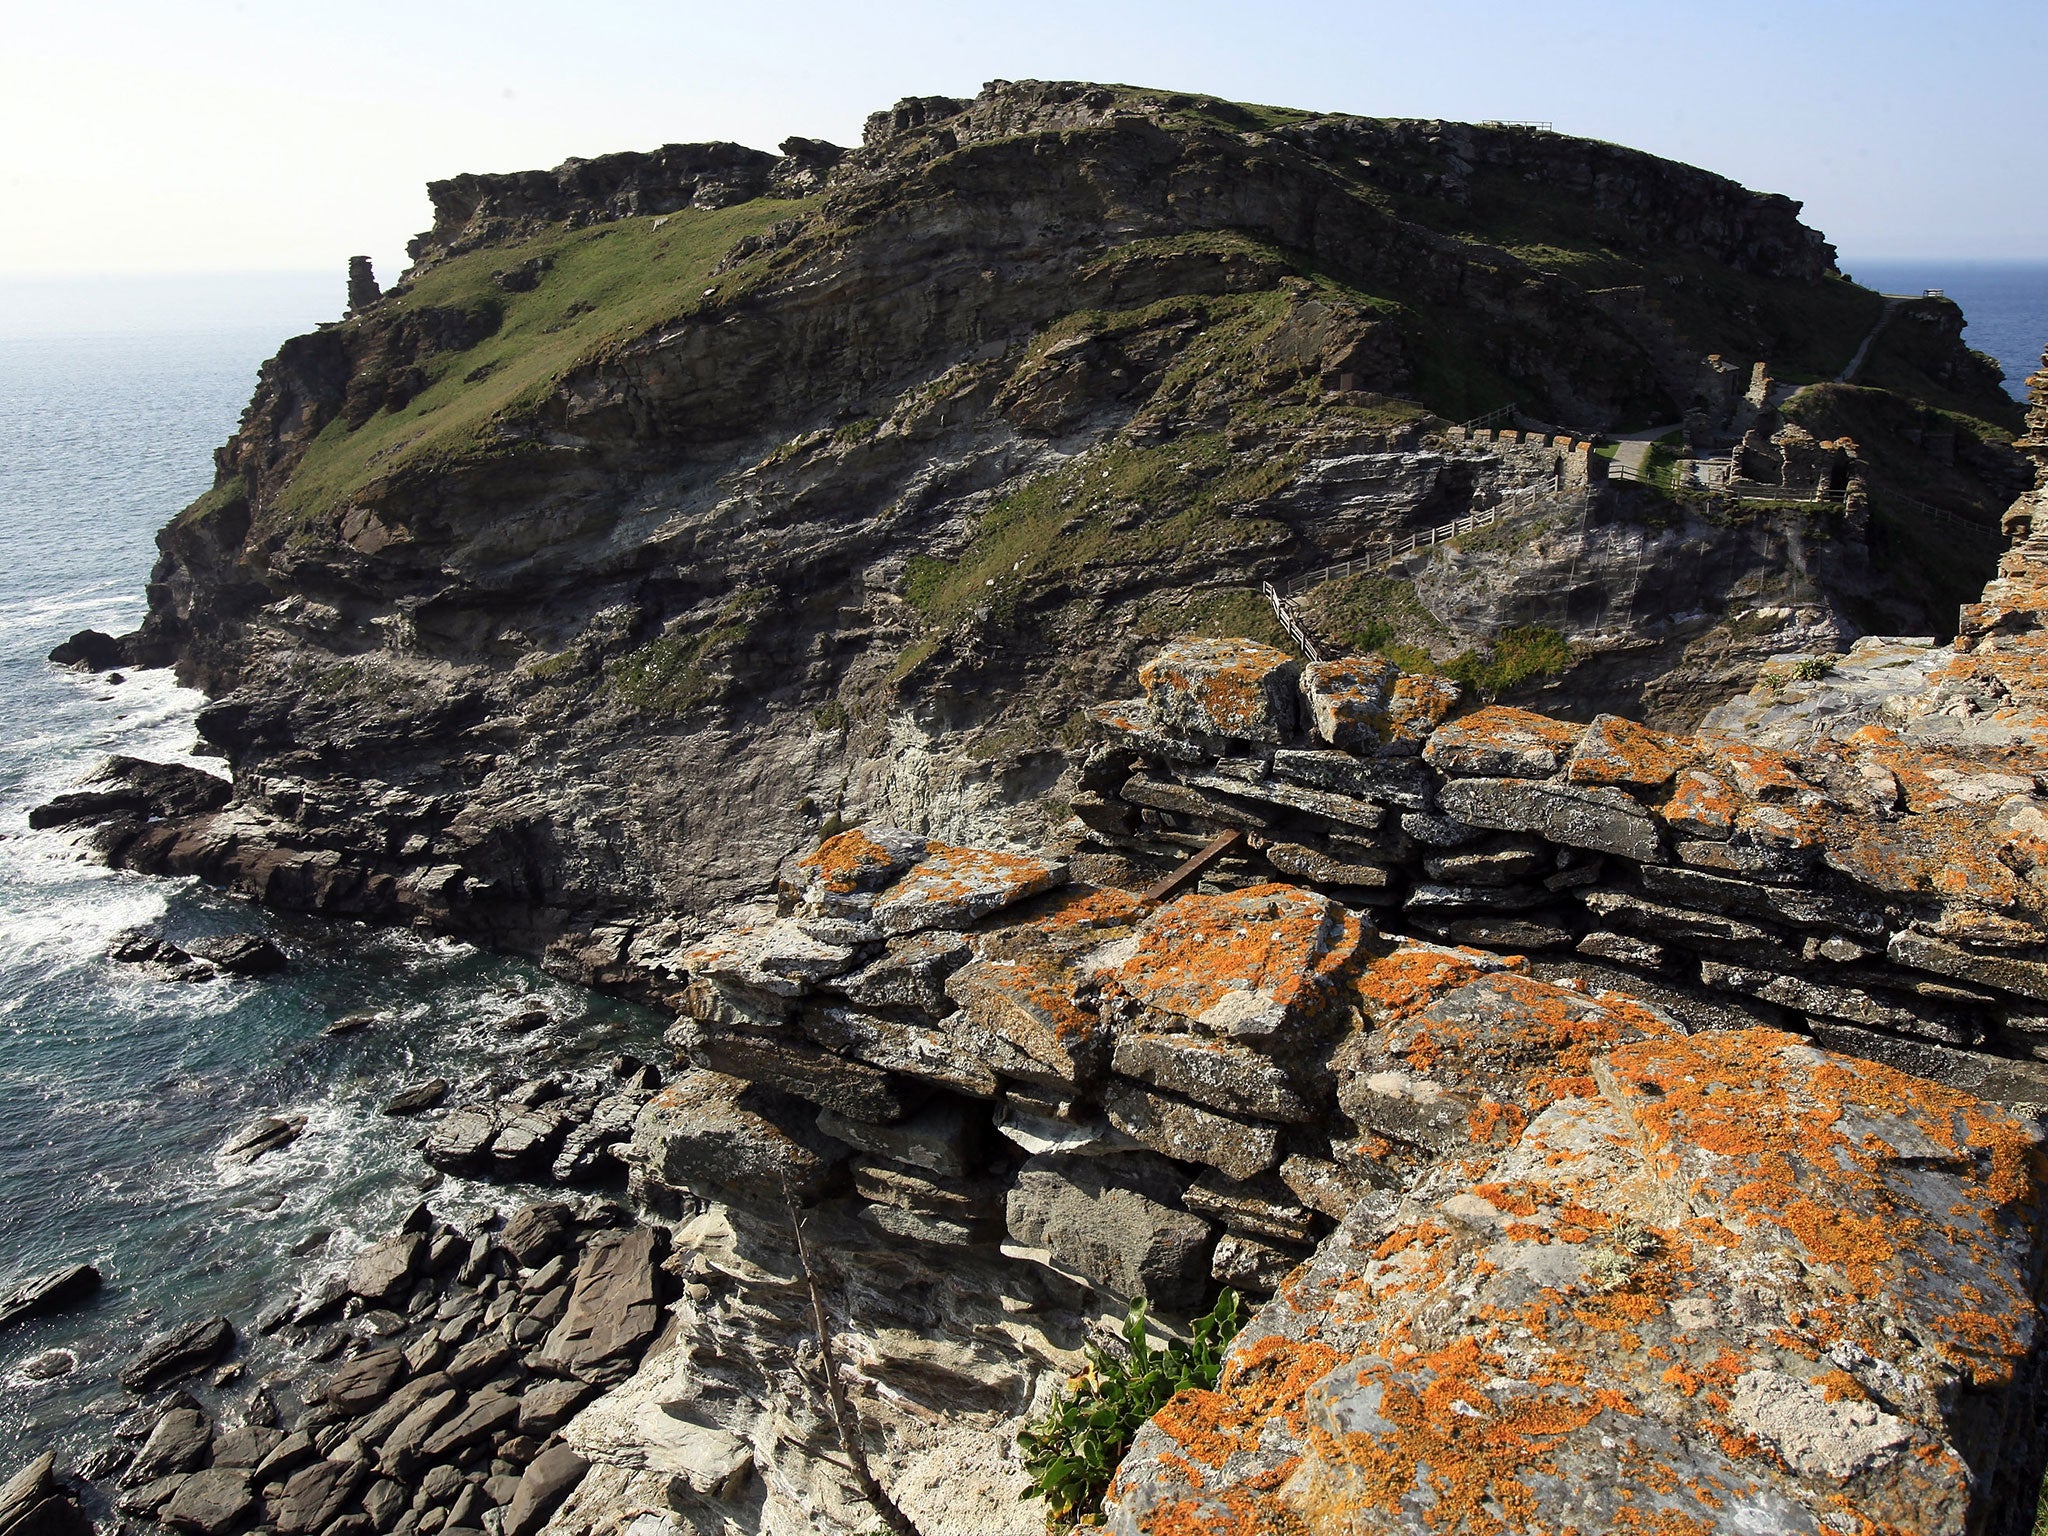 Tintagel is one of the most popular tourist destinations in England, due to its historic connections with Arthurian legend